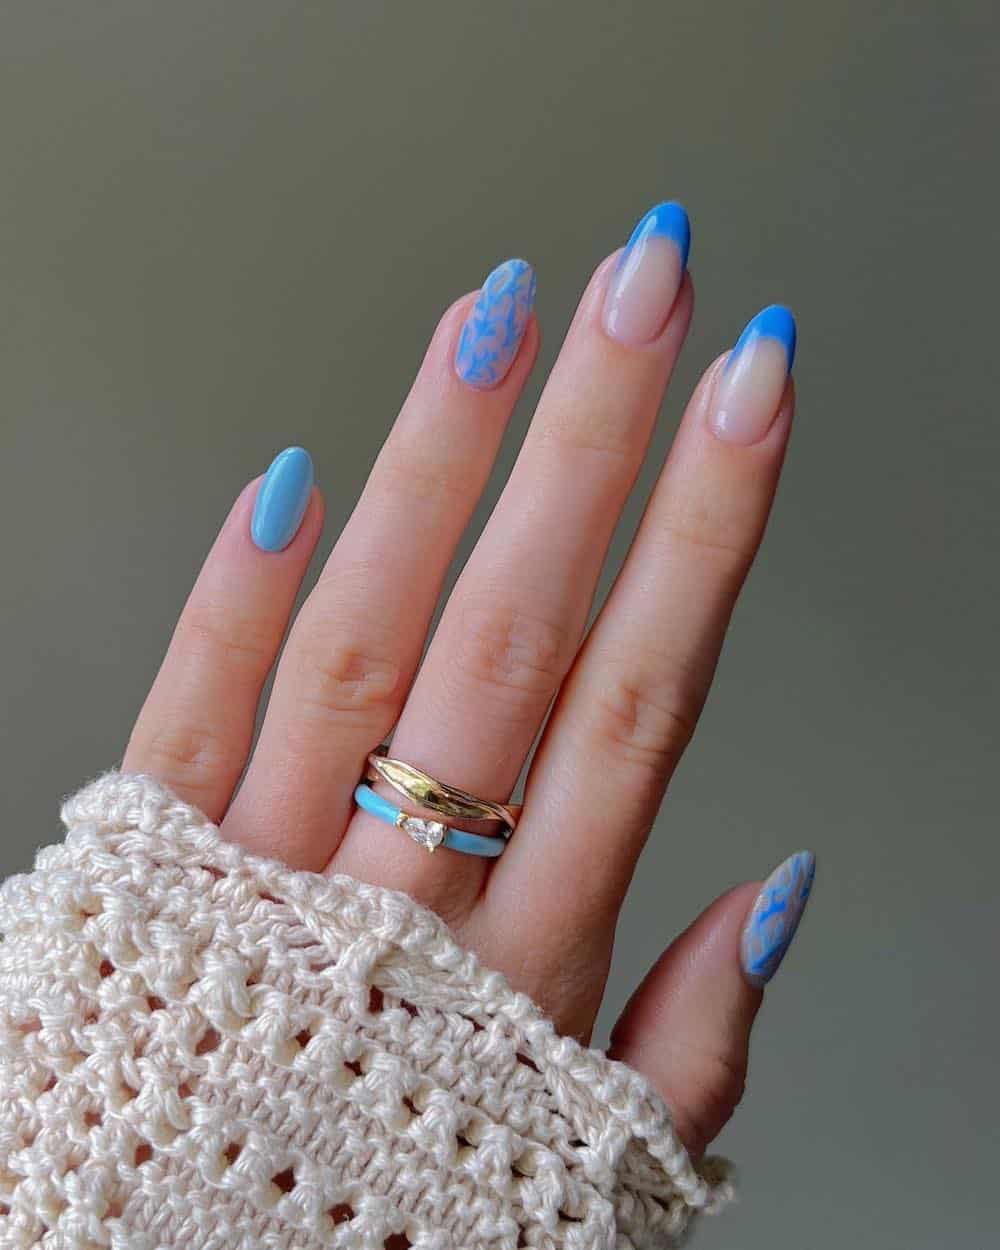 A hand with medium almond nails painted with blue French tips, a solid blue accent nail, and nude nails with blue coral nail art